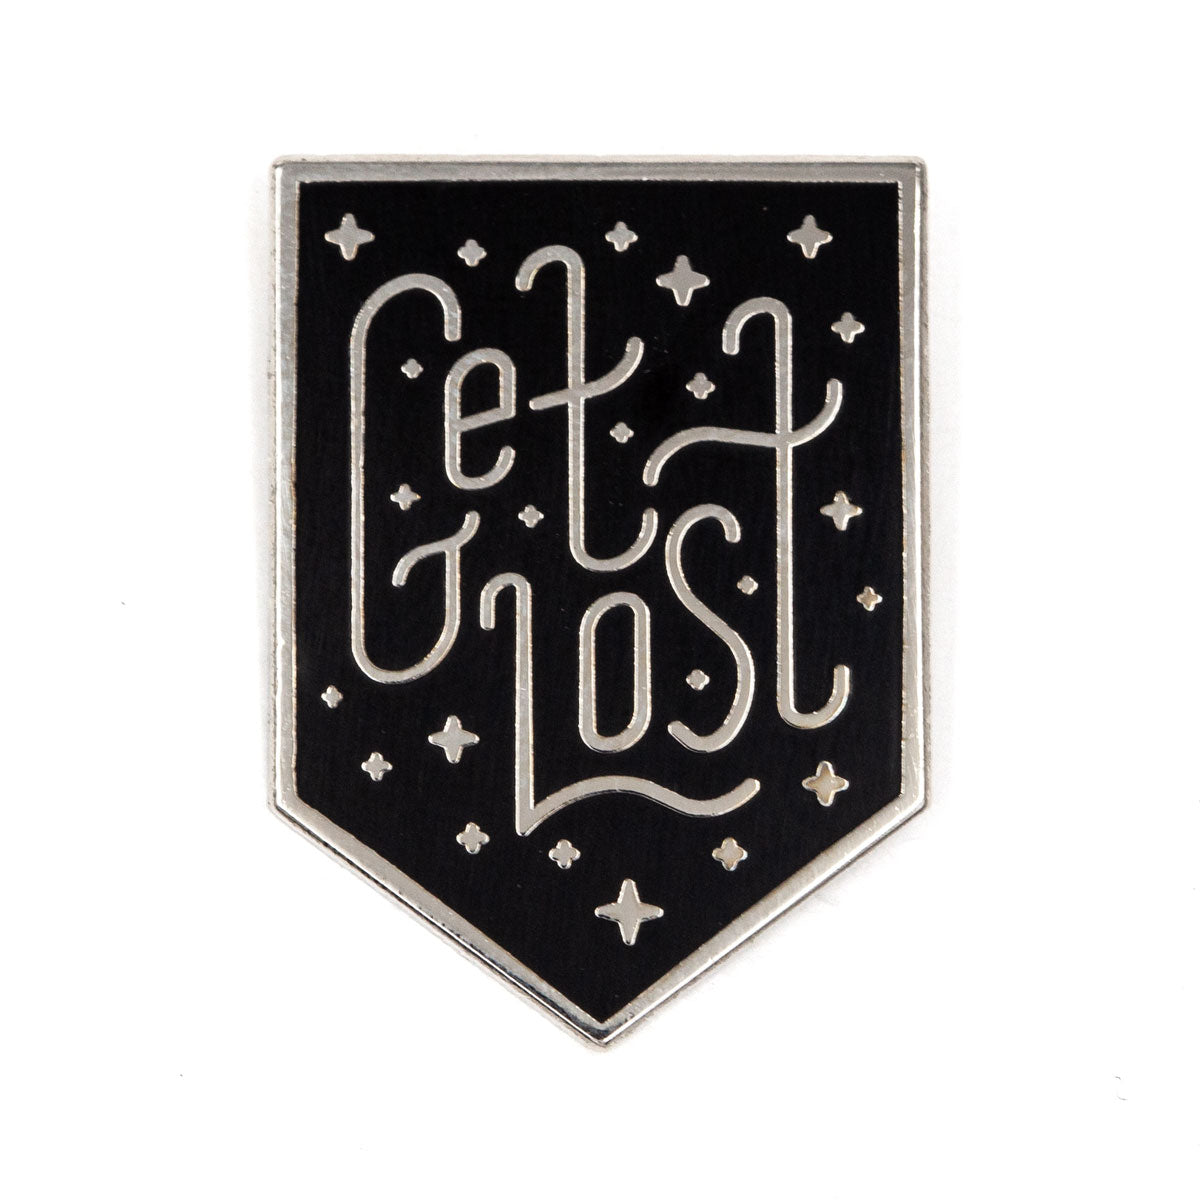 Get Lost Pin